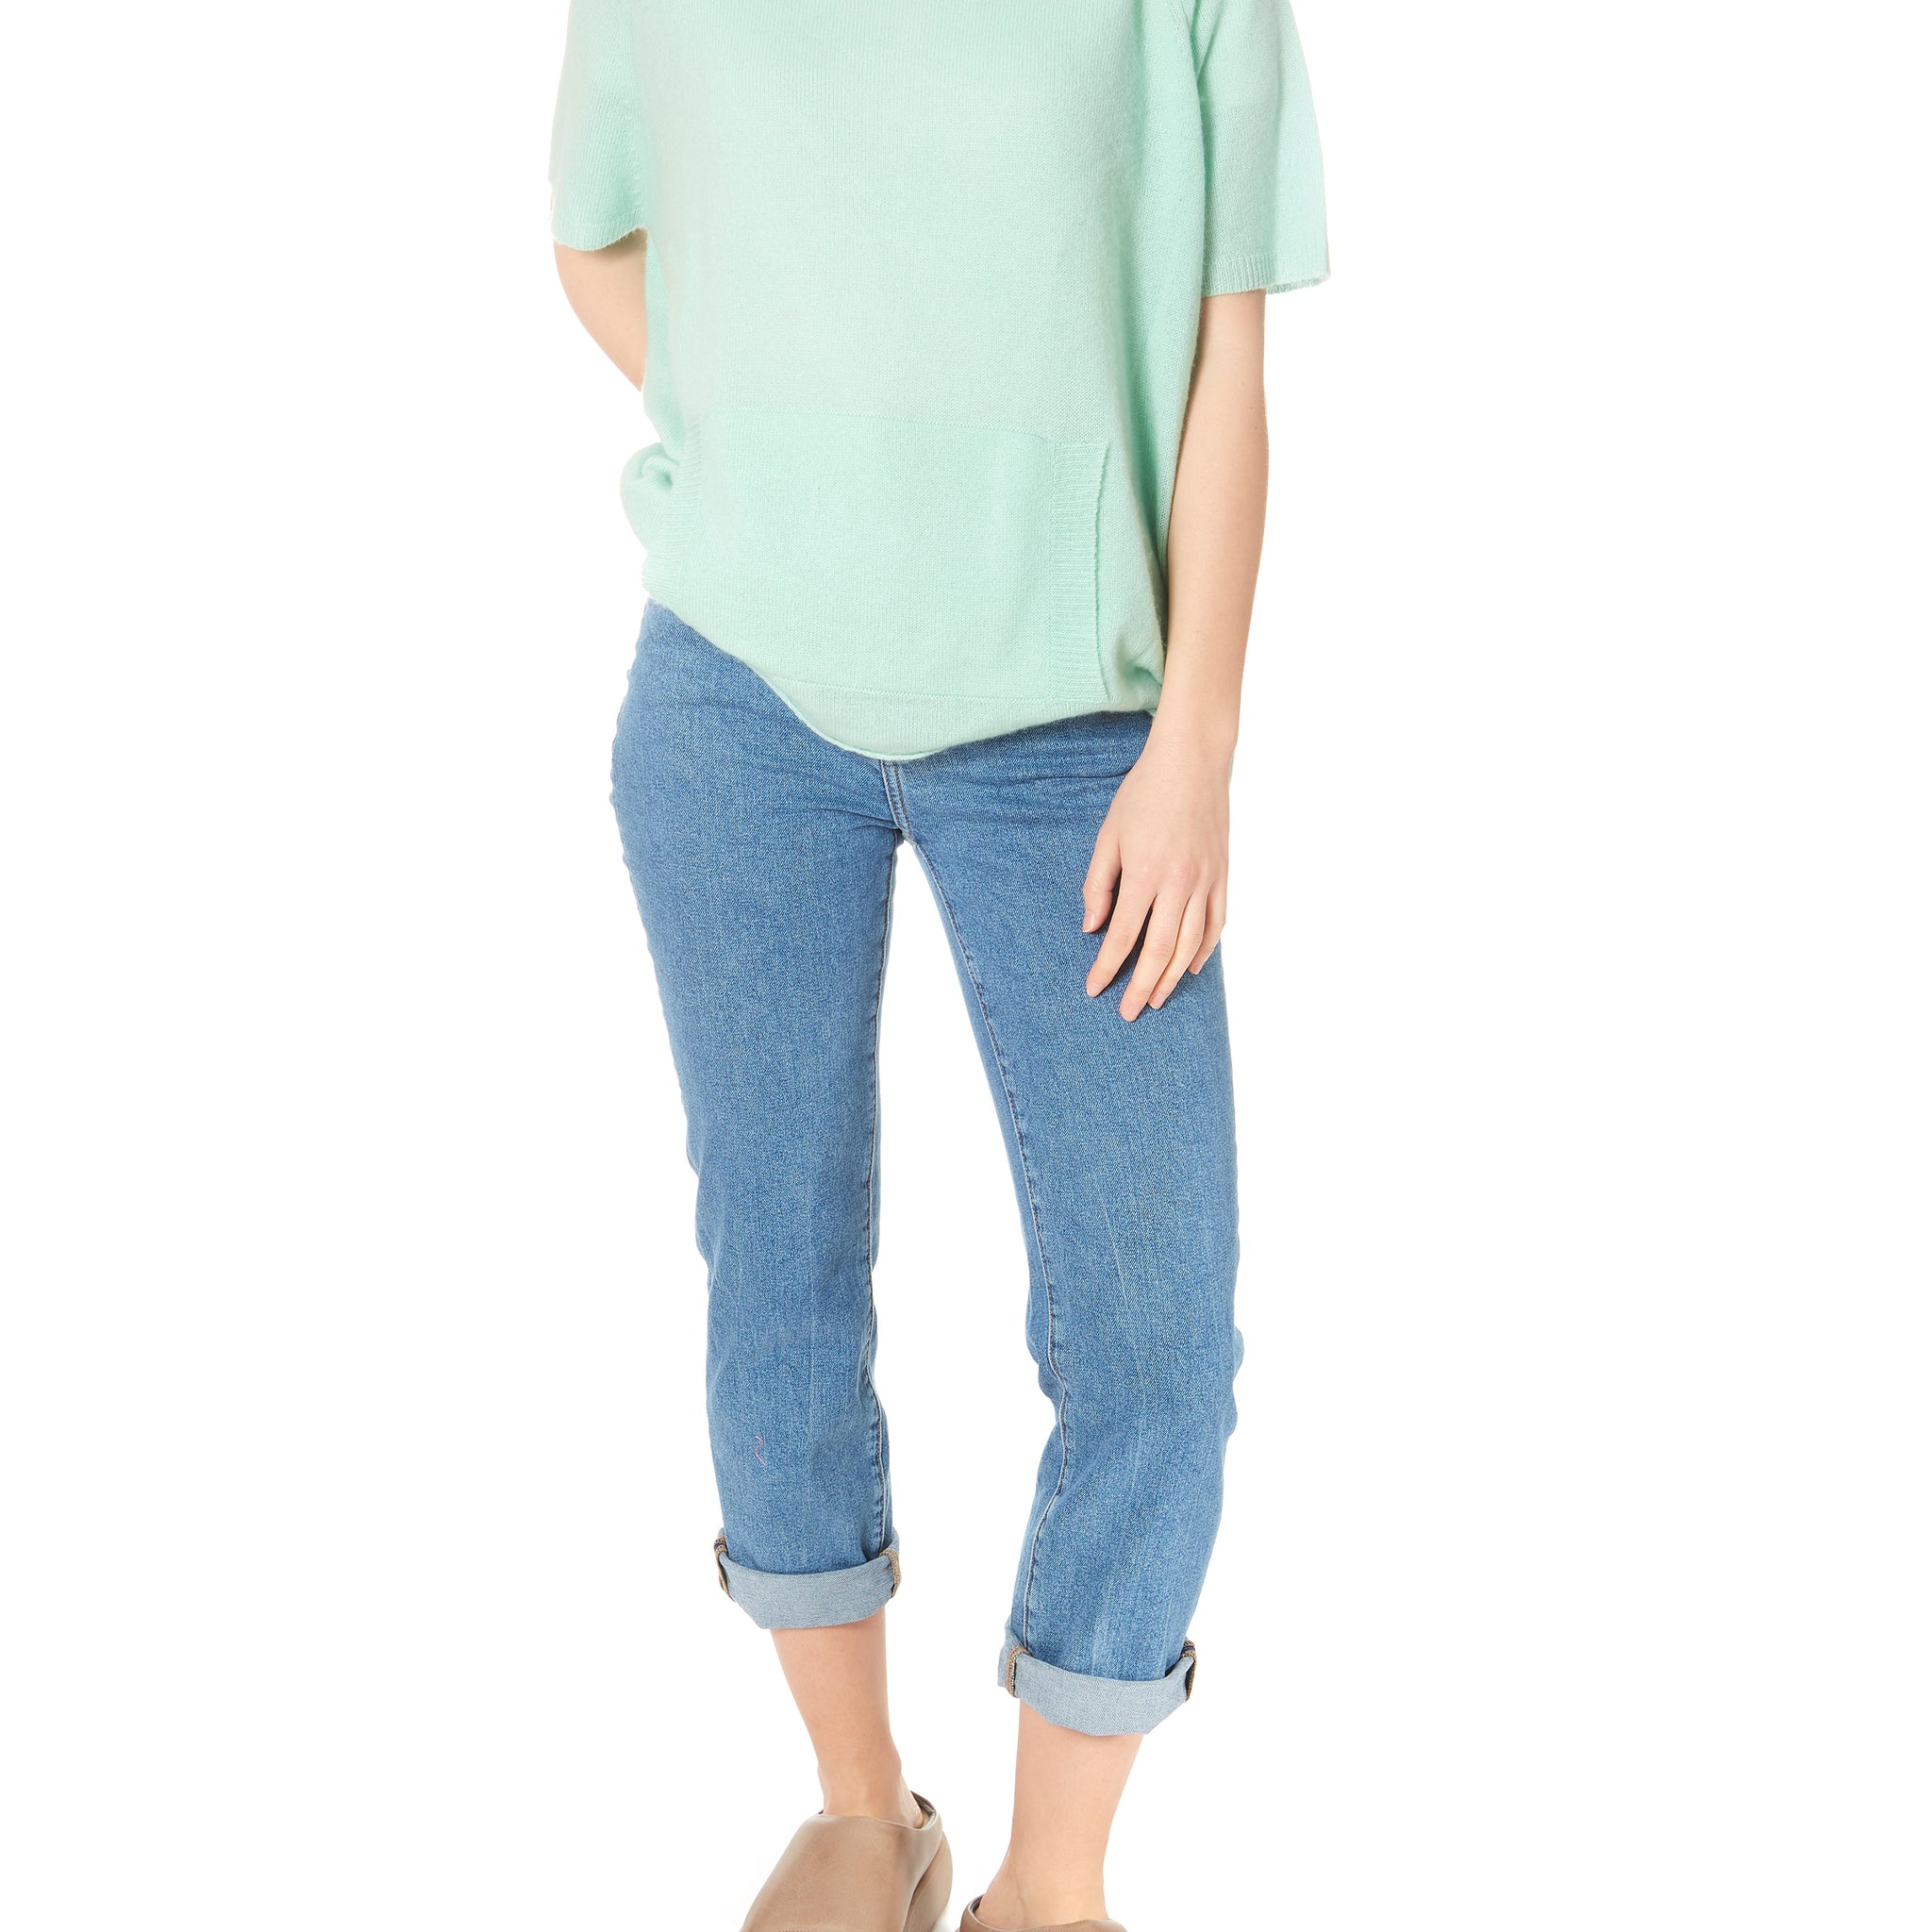 Alyn Soft Mint Short Sleeve Cashmere Sweater